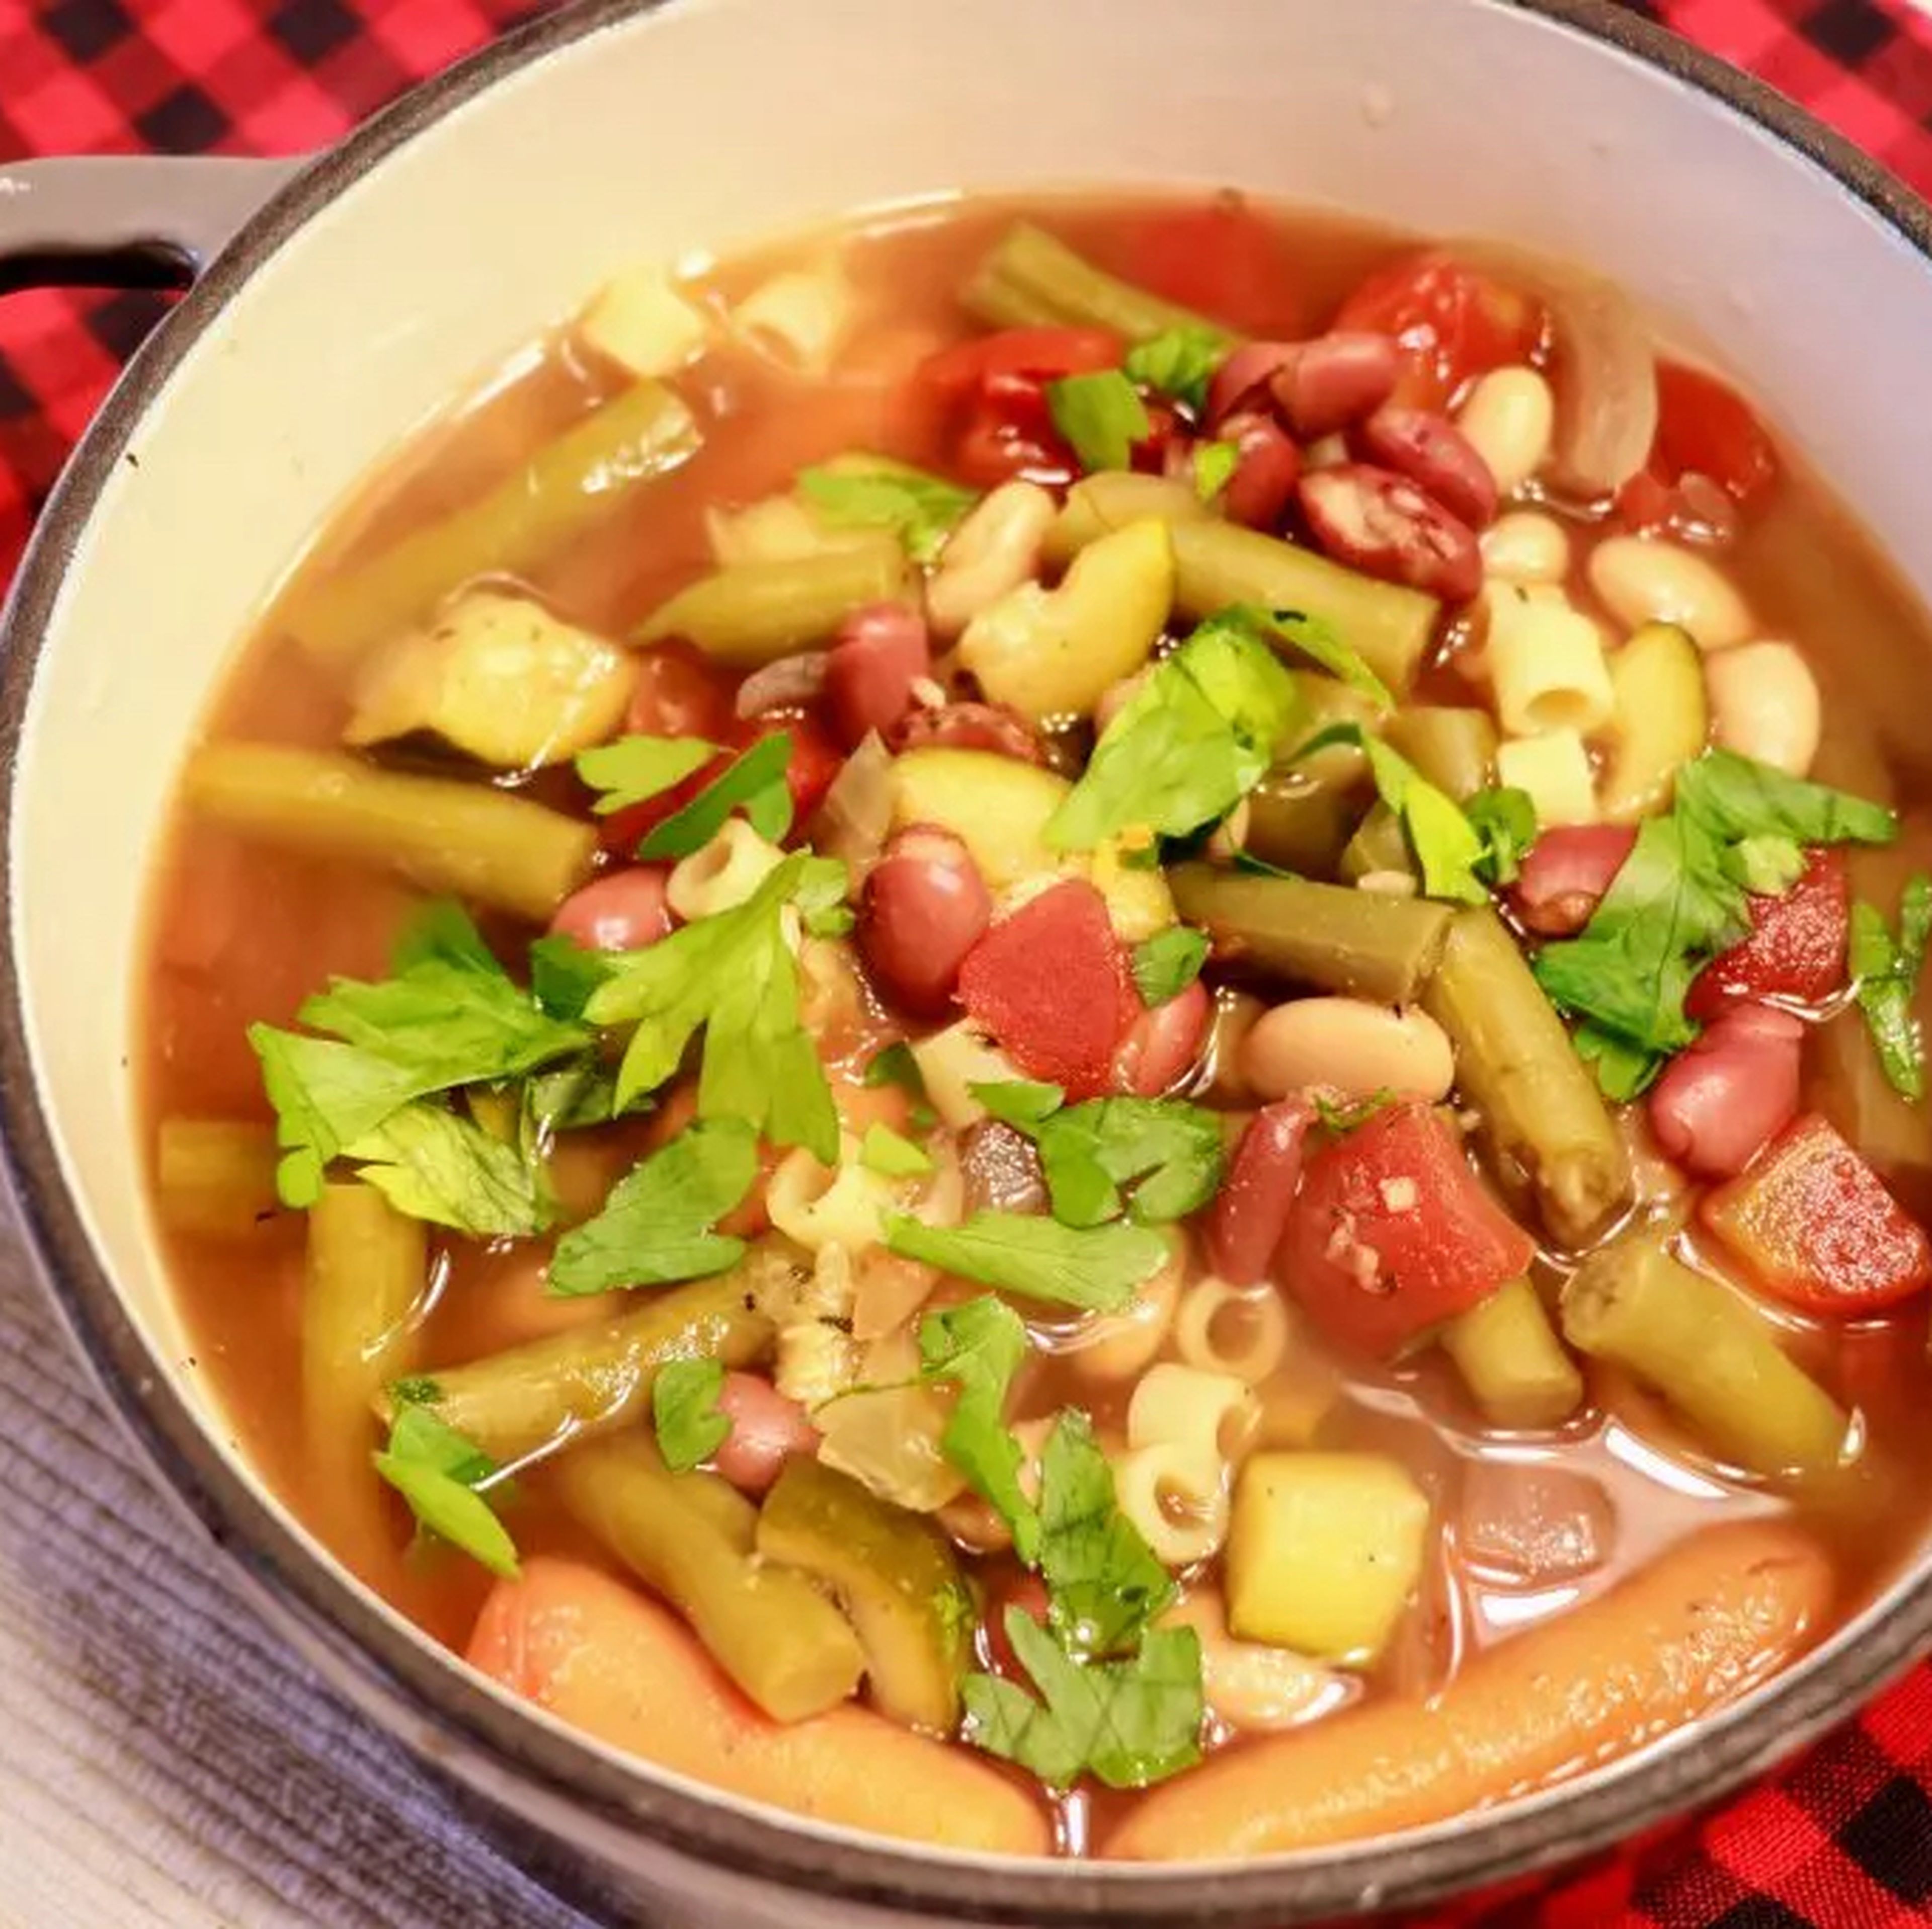 Slow Cooker Minestrone Soup